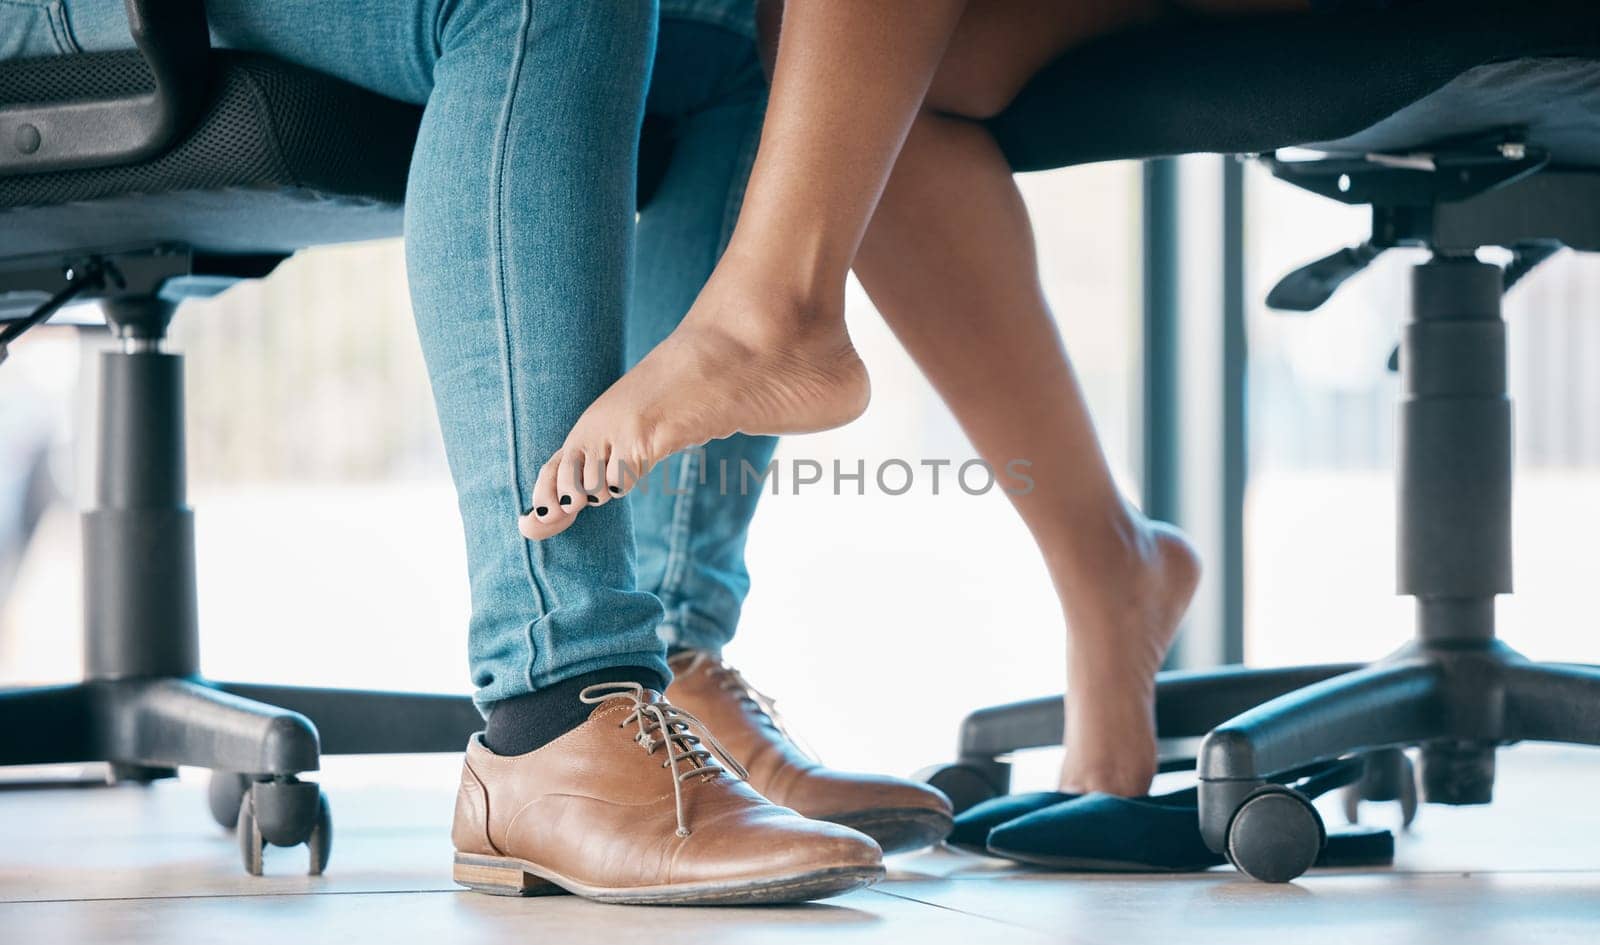 Feet, flirt and affair with a work romance between and business man and woman in the office together. Couple, shoes and love with a male and female flirting under a table at work in infidelity.